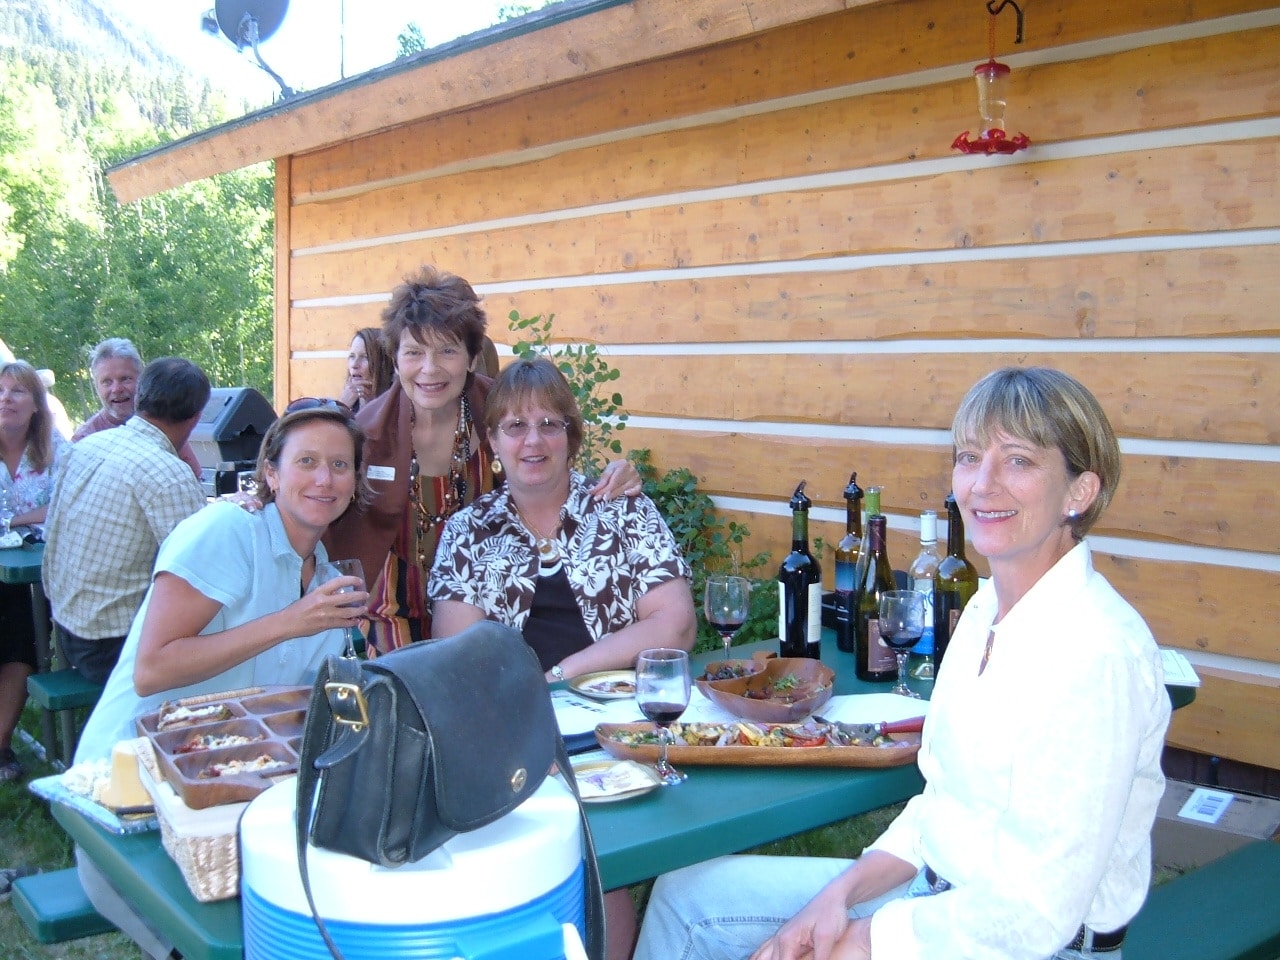 Friends gathered at a patio drinking wine on a sunny day.